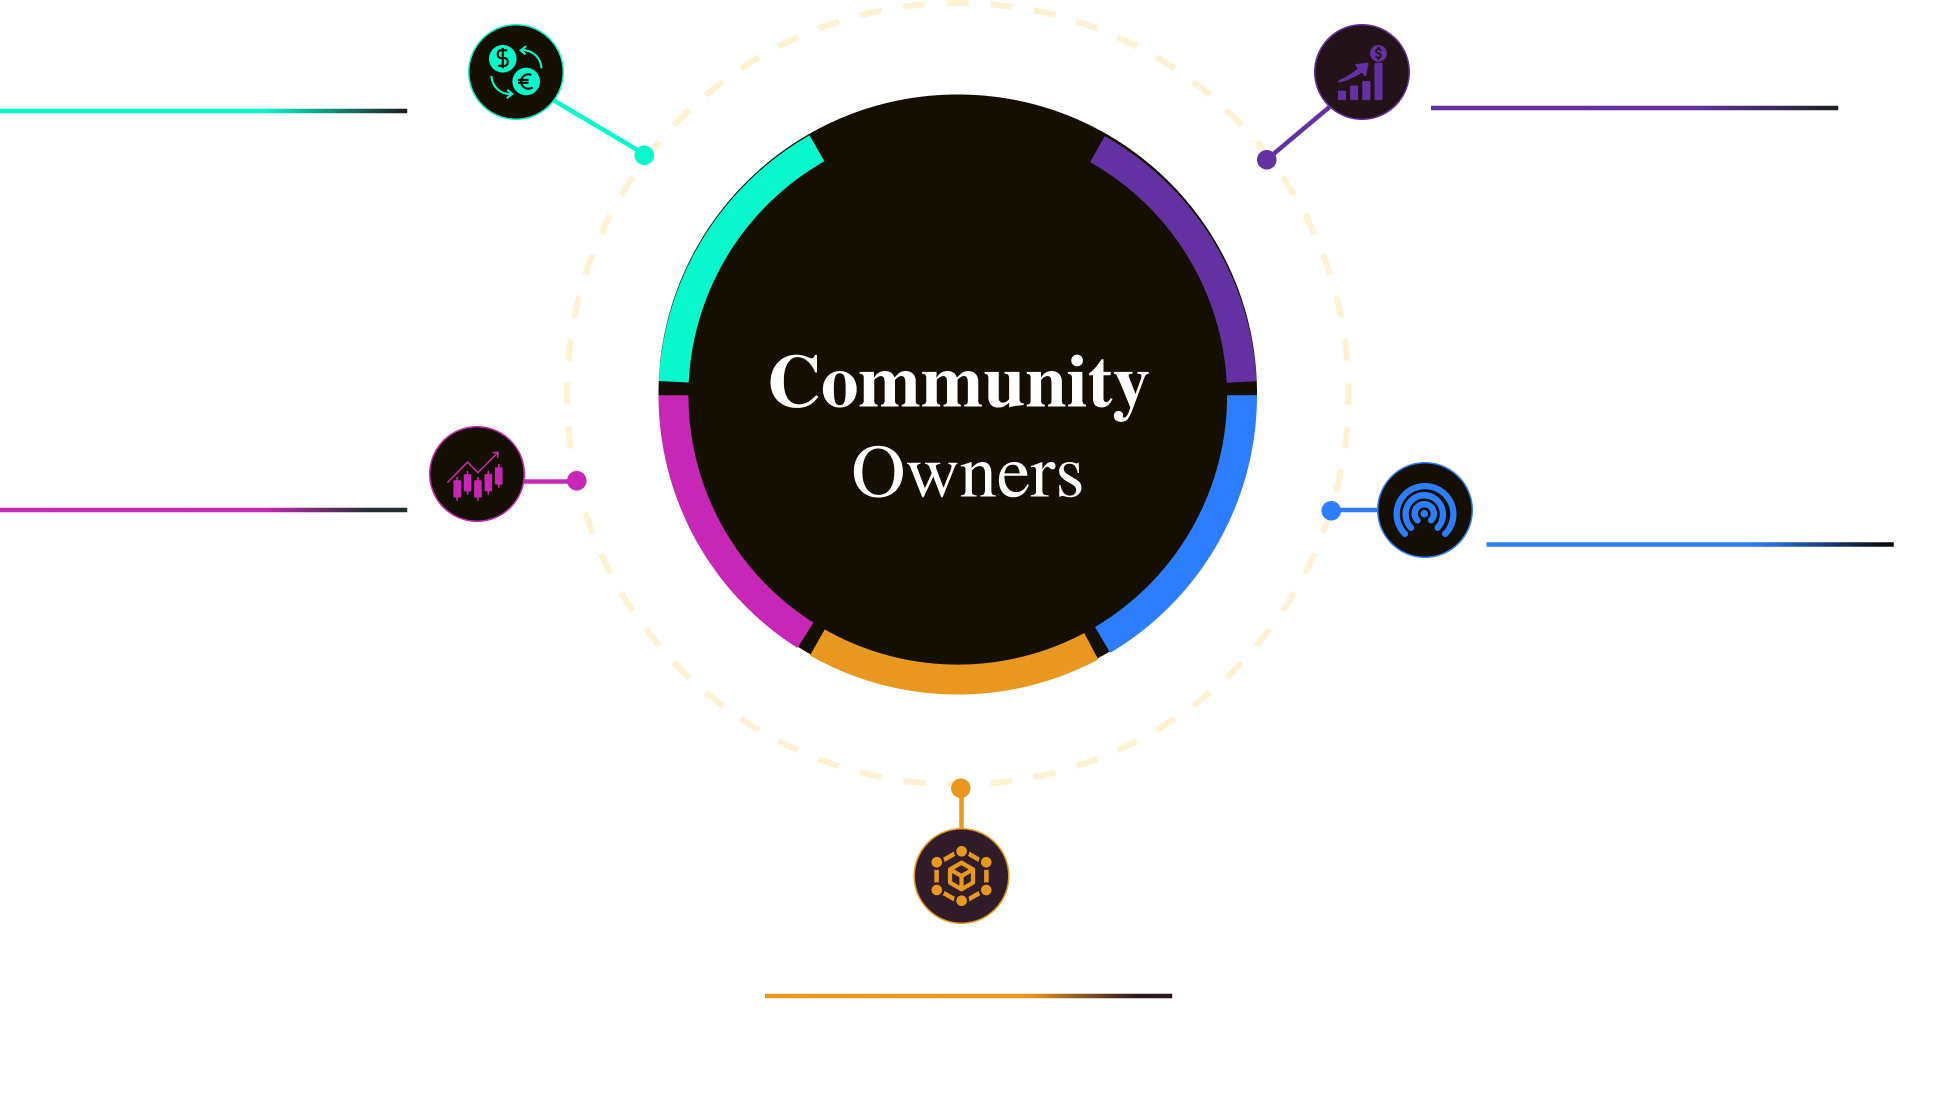 For Community Owners